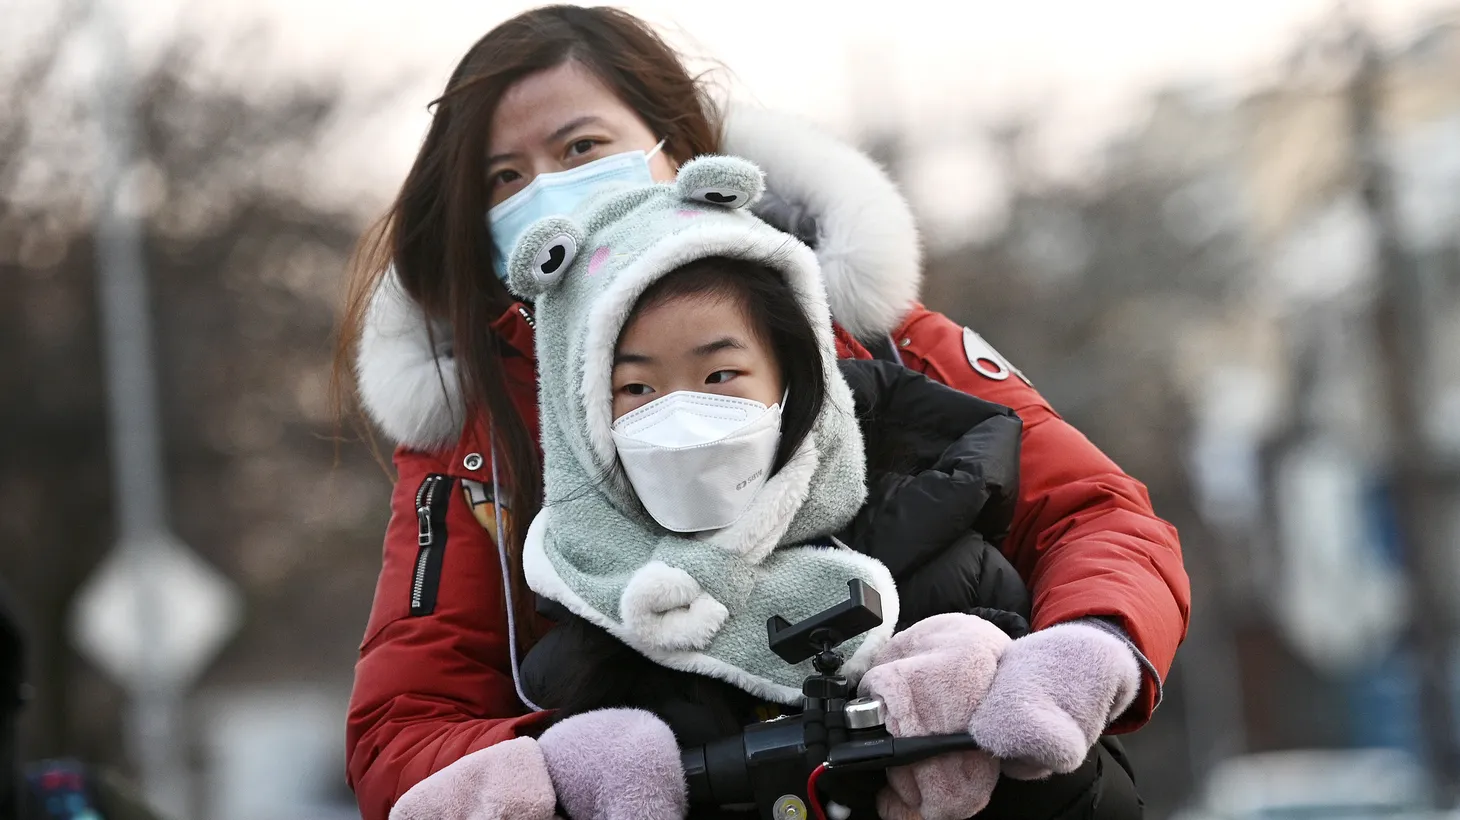 A child wears a mask while being accompanied to school on a scooter in Queens, NY, February 8, 2022. New Jersey Gov. Phil Murphy said he will rescind the mask mandate for students and teachers on March 7. Pressure mounts for NY Gov. Kathy Hochul to do the same, as daily positivity rates in New York City schools fall below 1%.